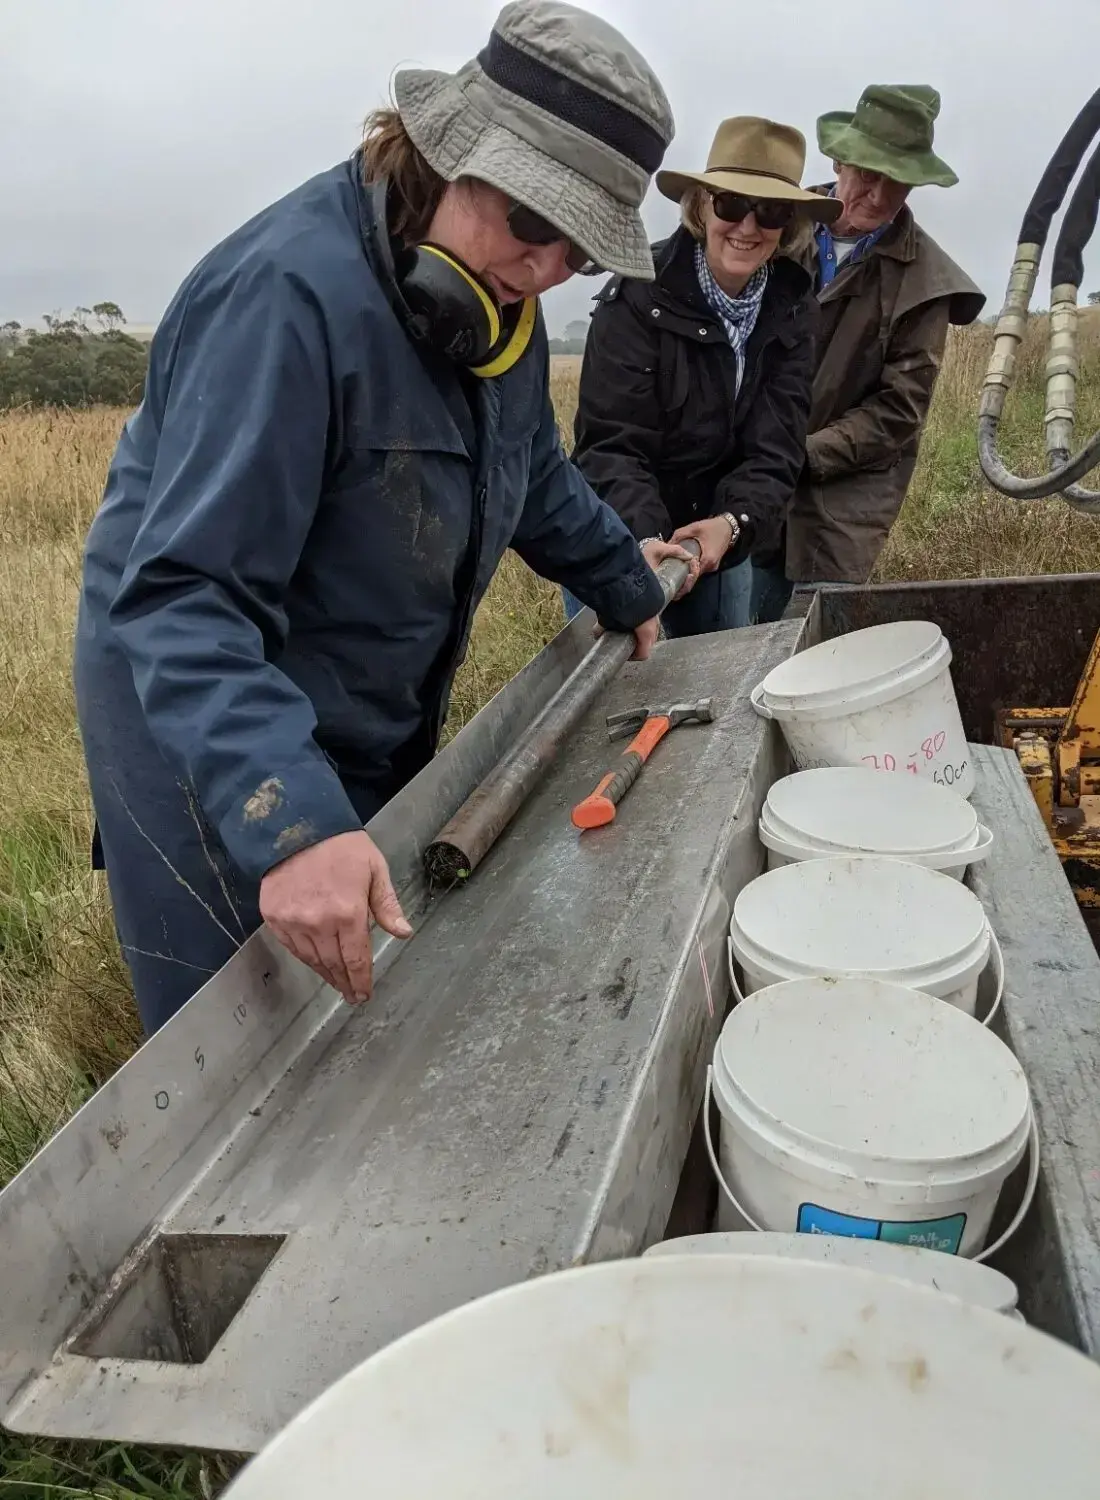 Getting the soil cores out of the tube can be tricky business! From left to right: Kirsty Yeates, Liz Clarke and Martin Royds.